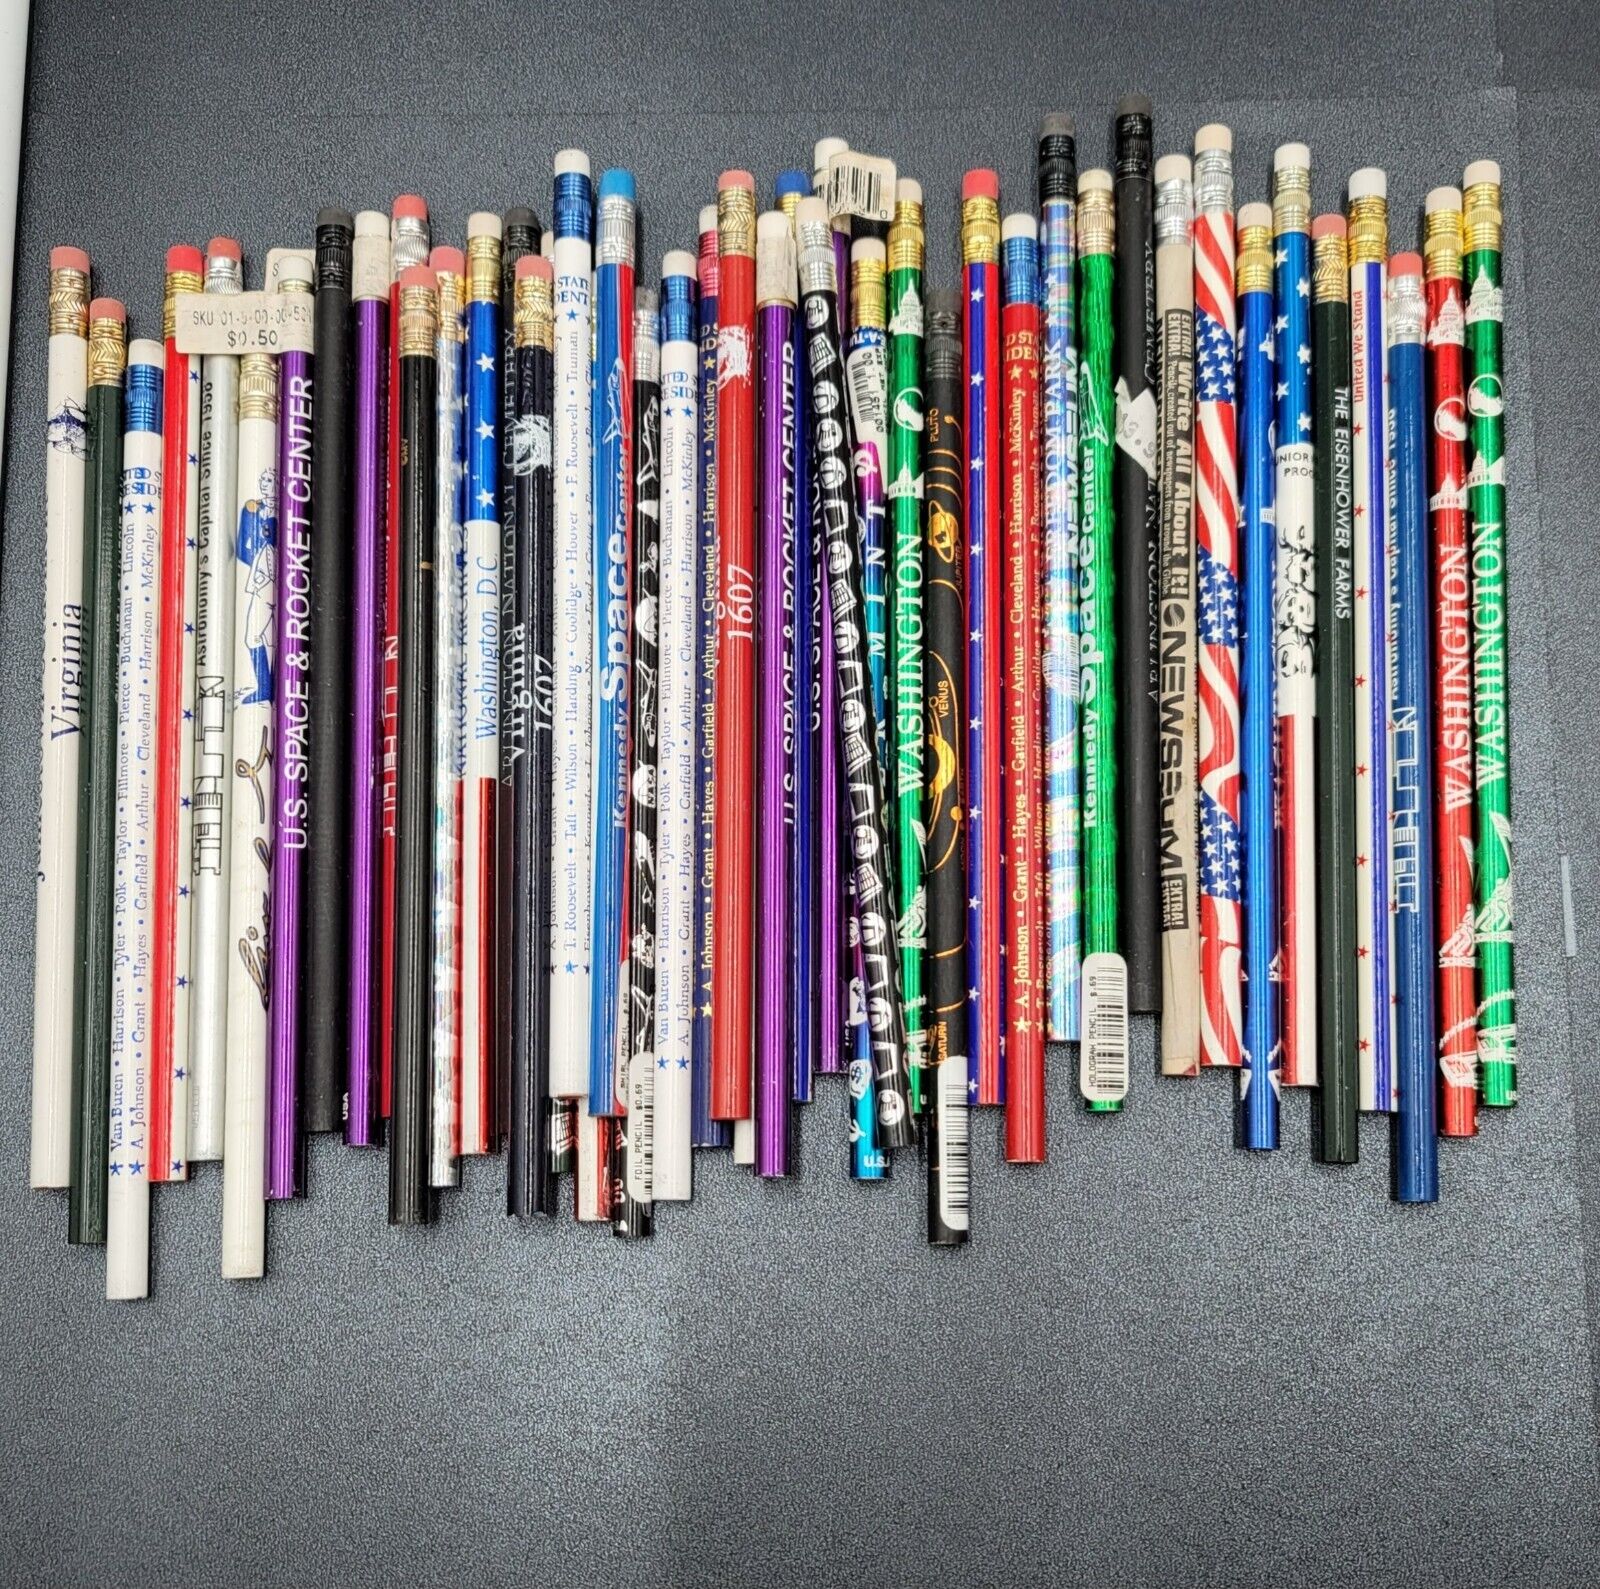 Huge Lot of 45 Vintage Pencils Unsharpened Patriotic Museums Monuments ALL USA